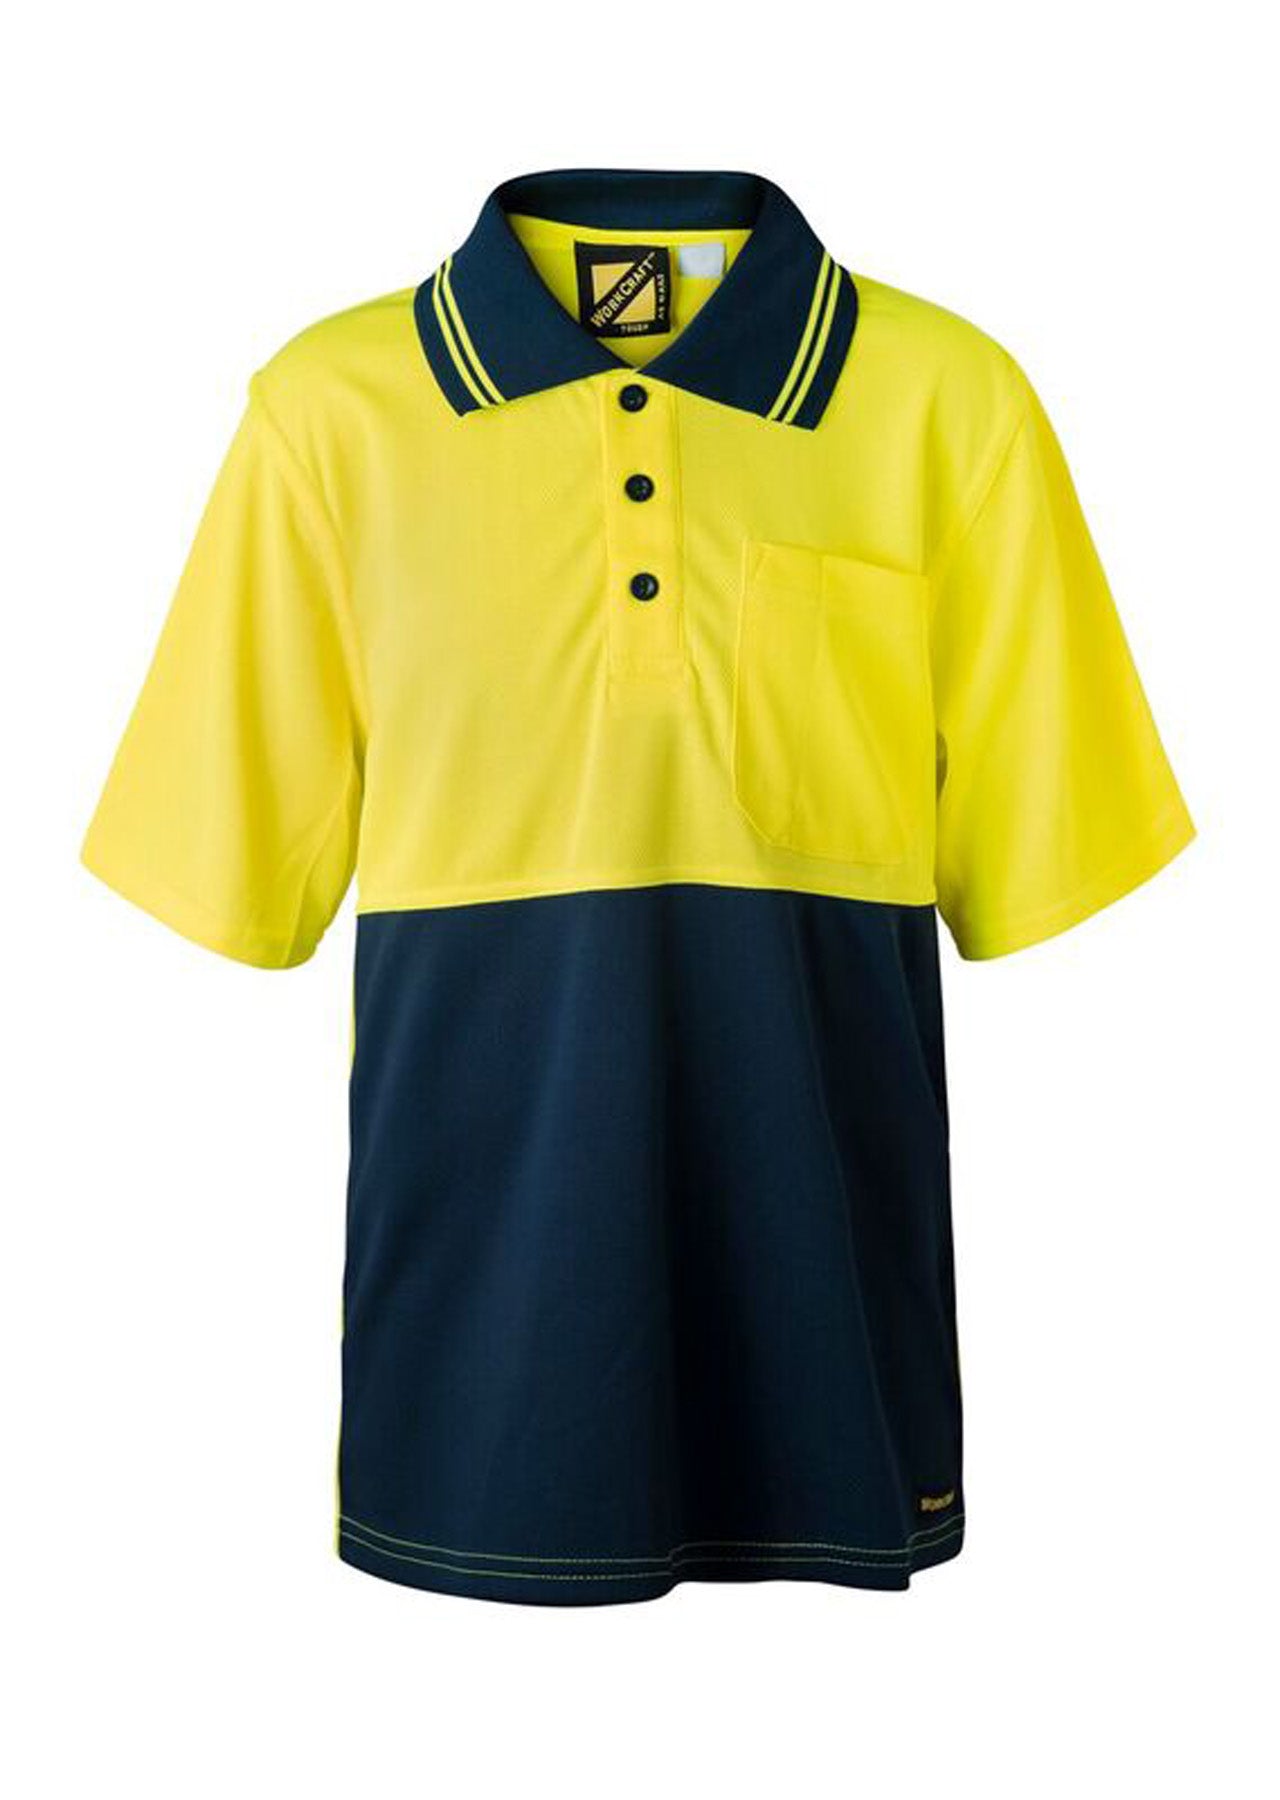 Kids Short Sleeve Two Tone Polo - made by Workcraft